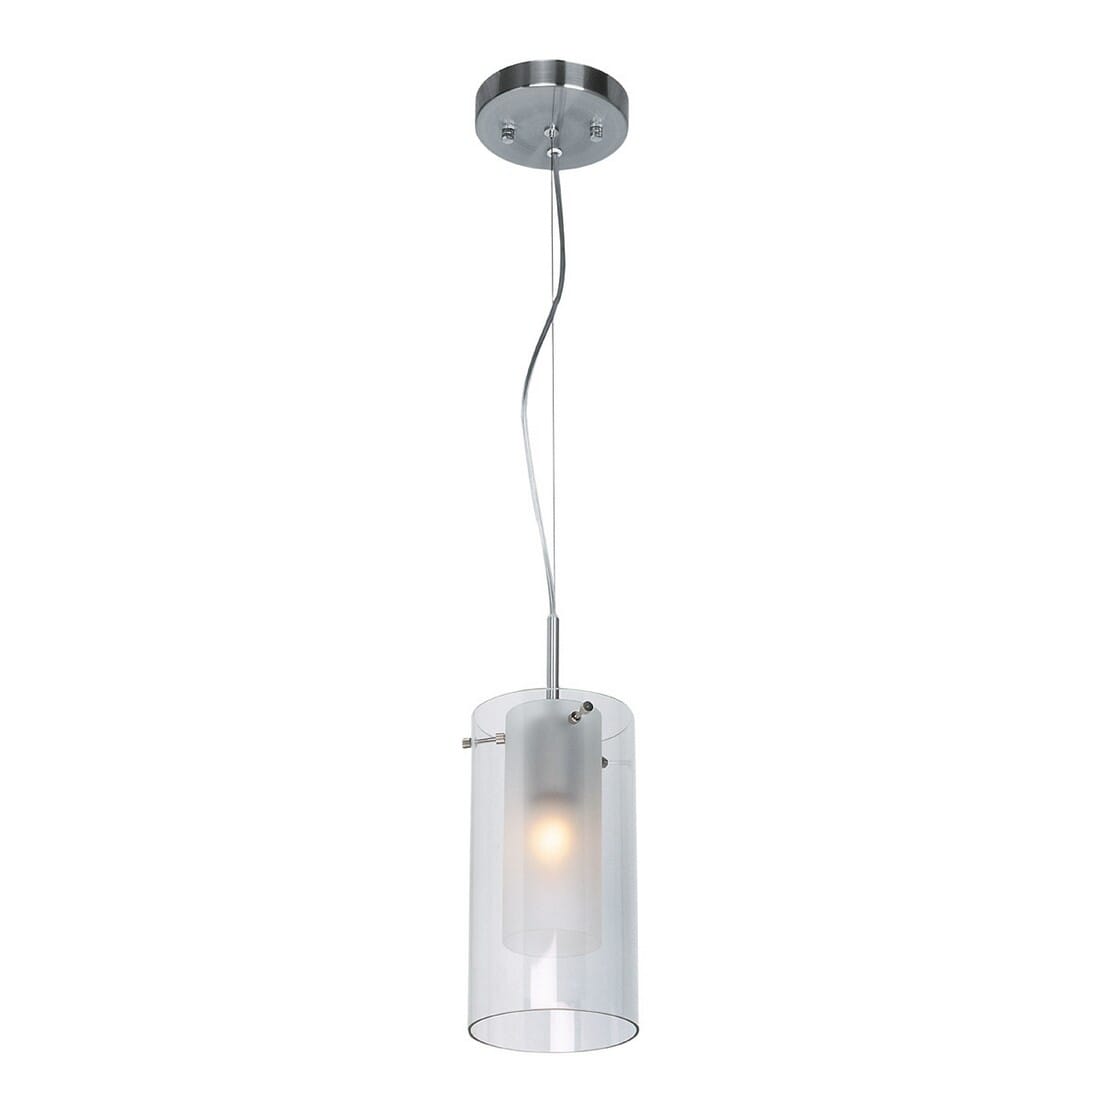 Access Proteus Pendant Light in Brushed Steel